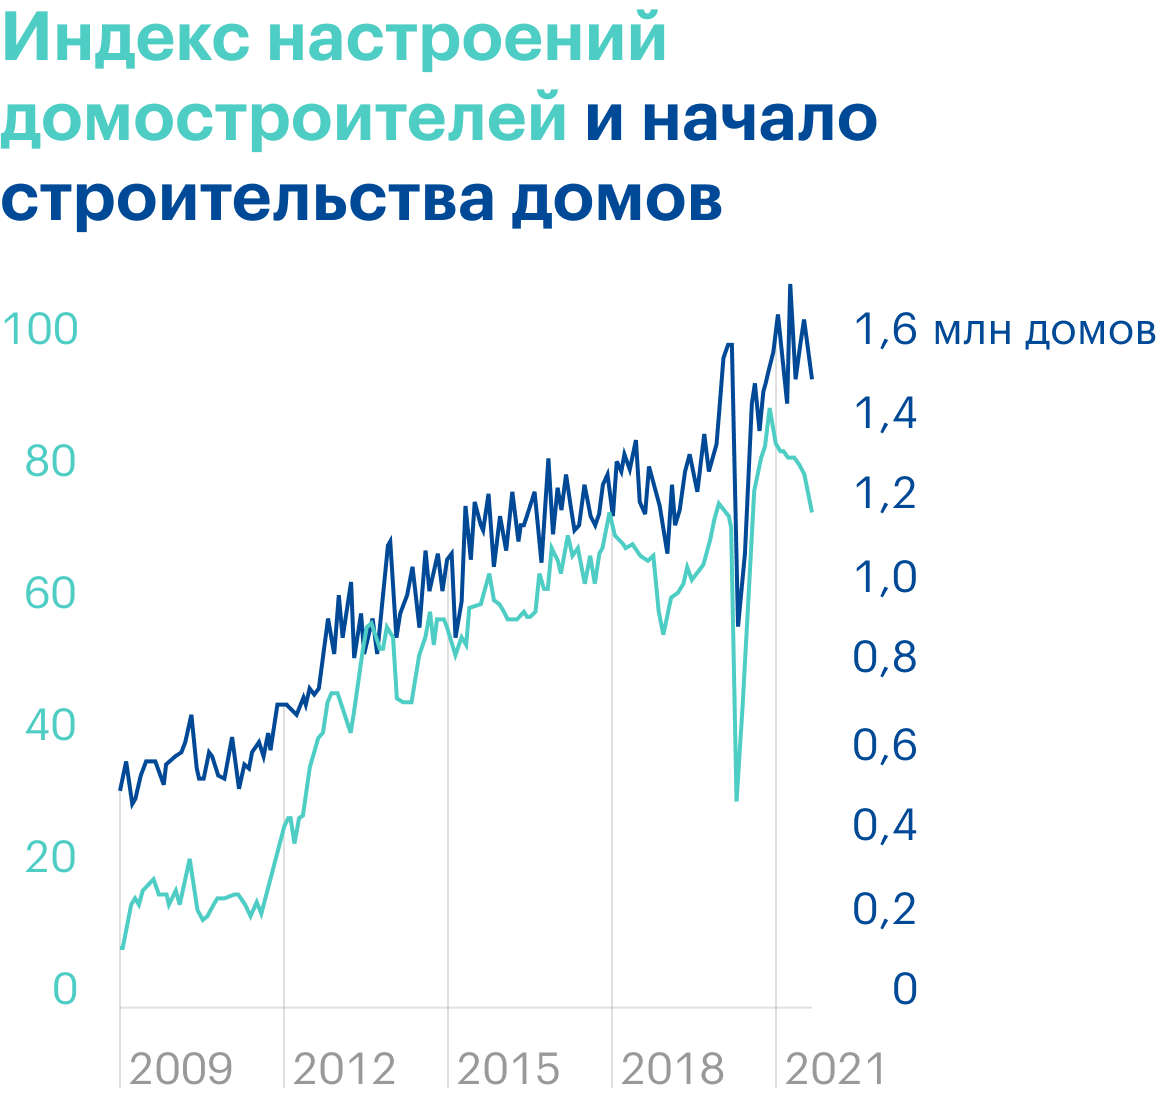 Источник: Daily Shot, Homebuilder sentiment suggests that housing starts could moderate further